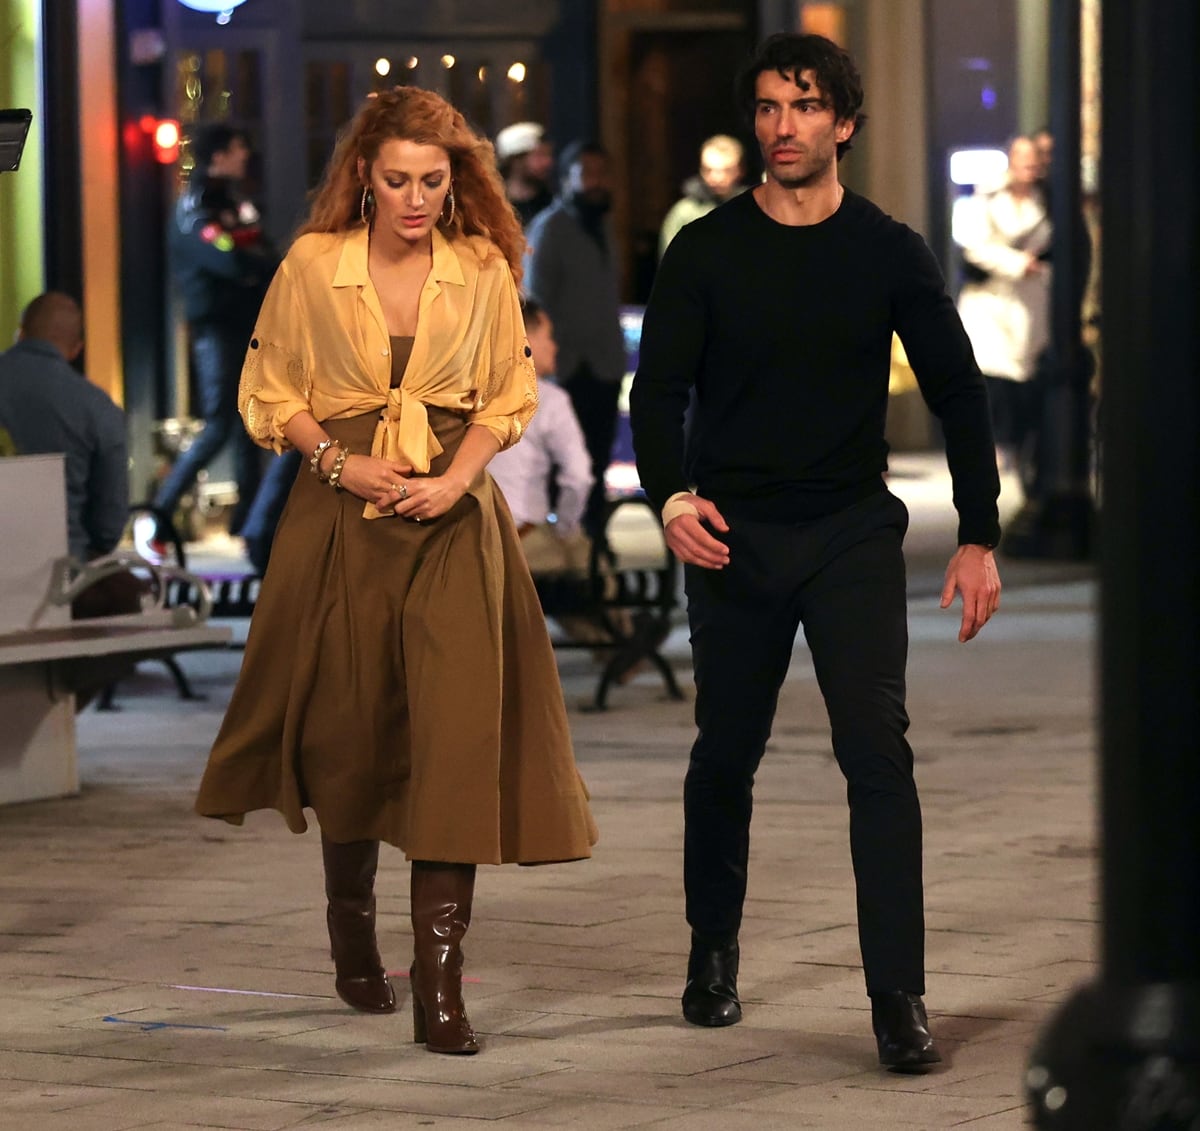 Blake Lively, in character as Lily Bloom, wears a strapless brown tea dress with a yellow shirt tied at the waist, while Justin Baldoni, as Ryle Kincaid, appears in an all-black outfit with a bandaged arm and dramatic fight scene makeup